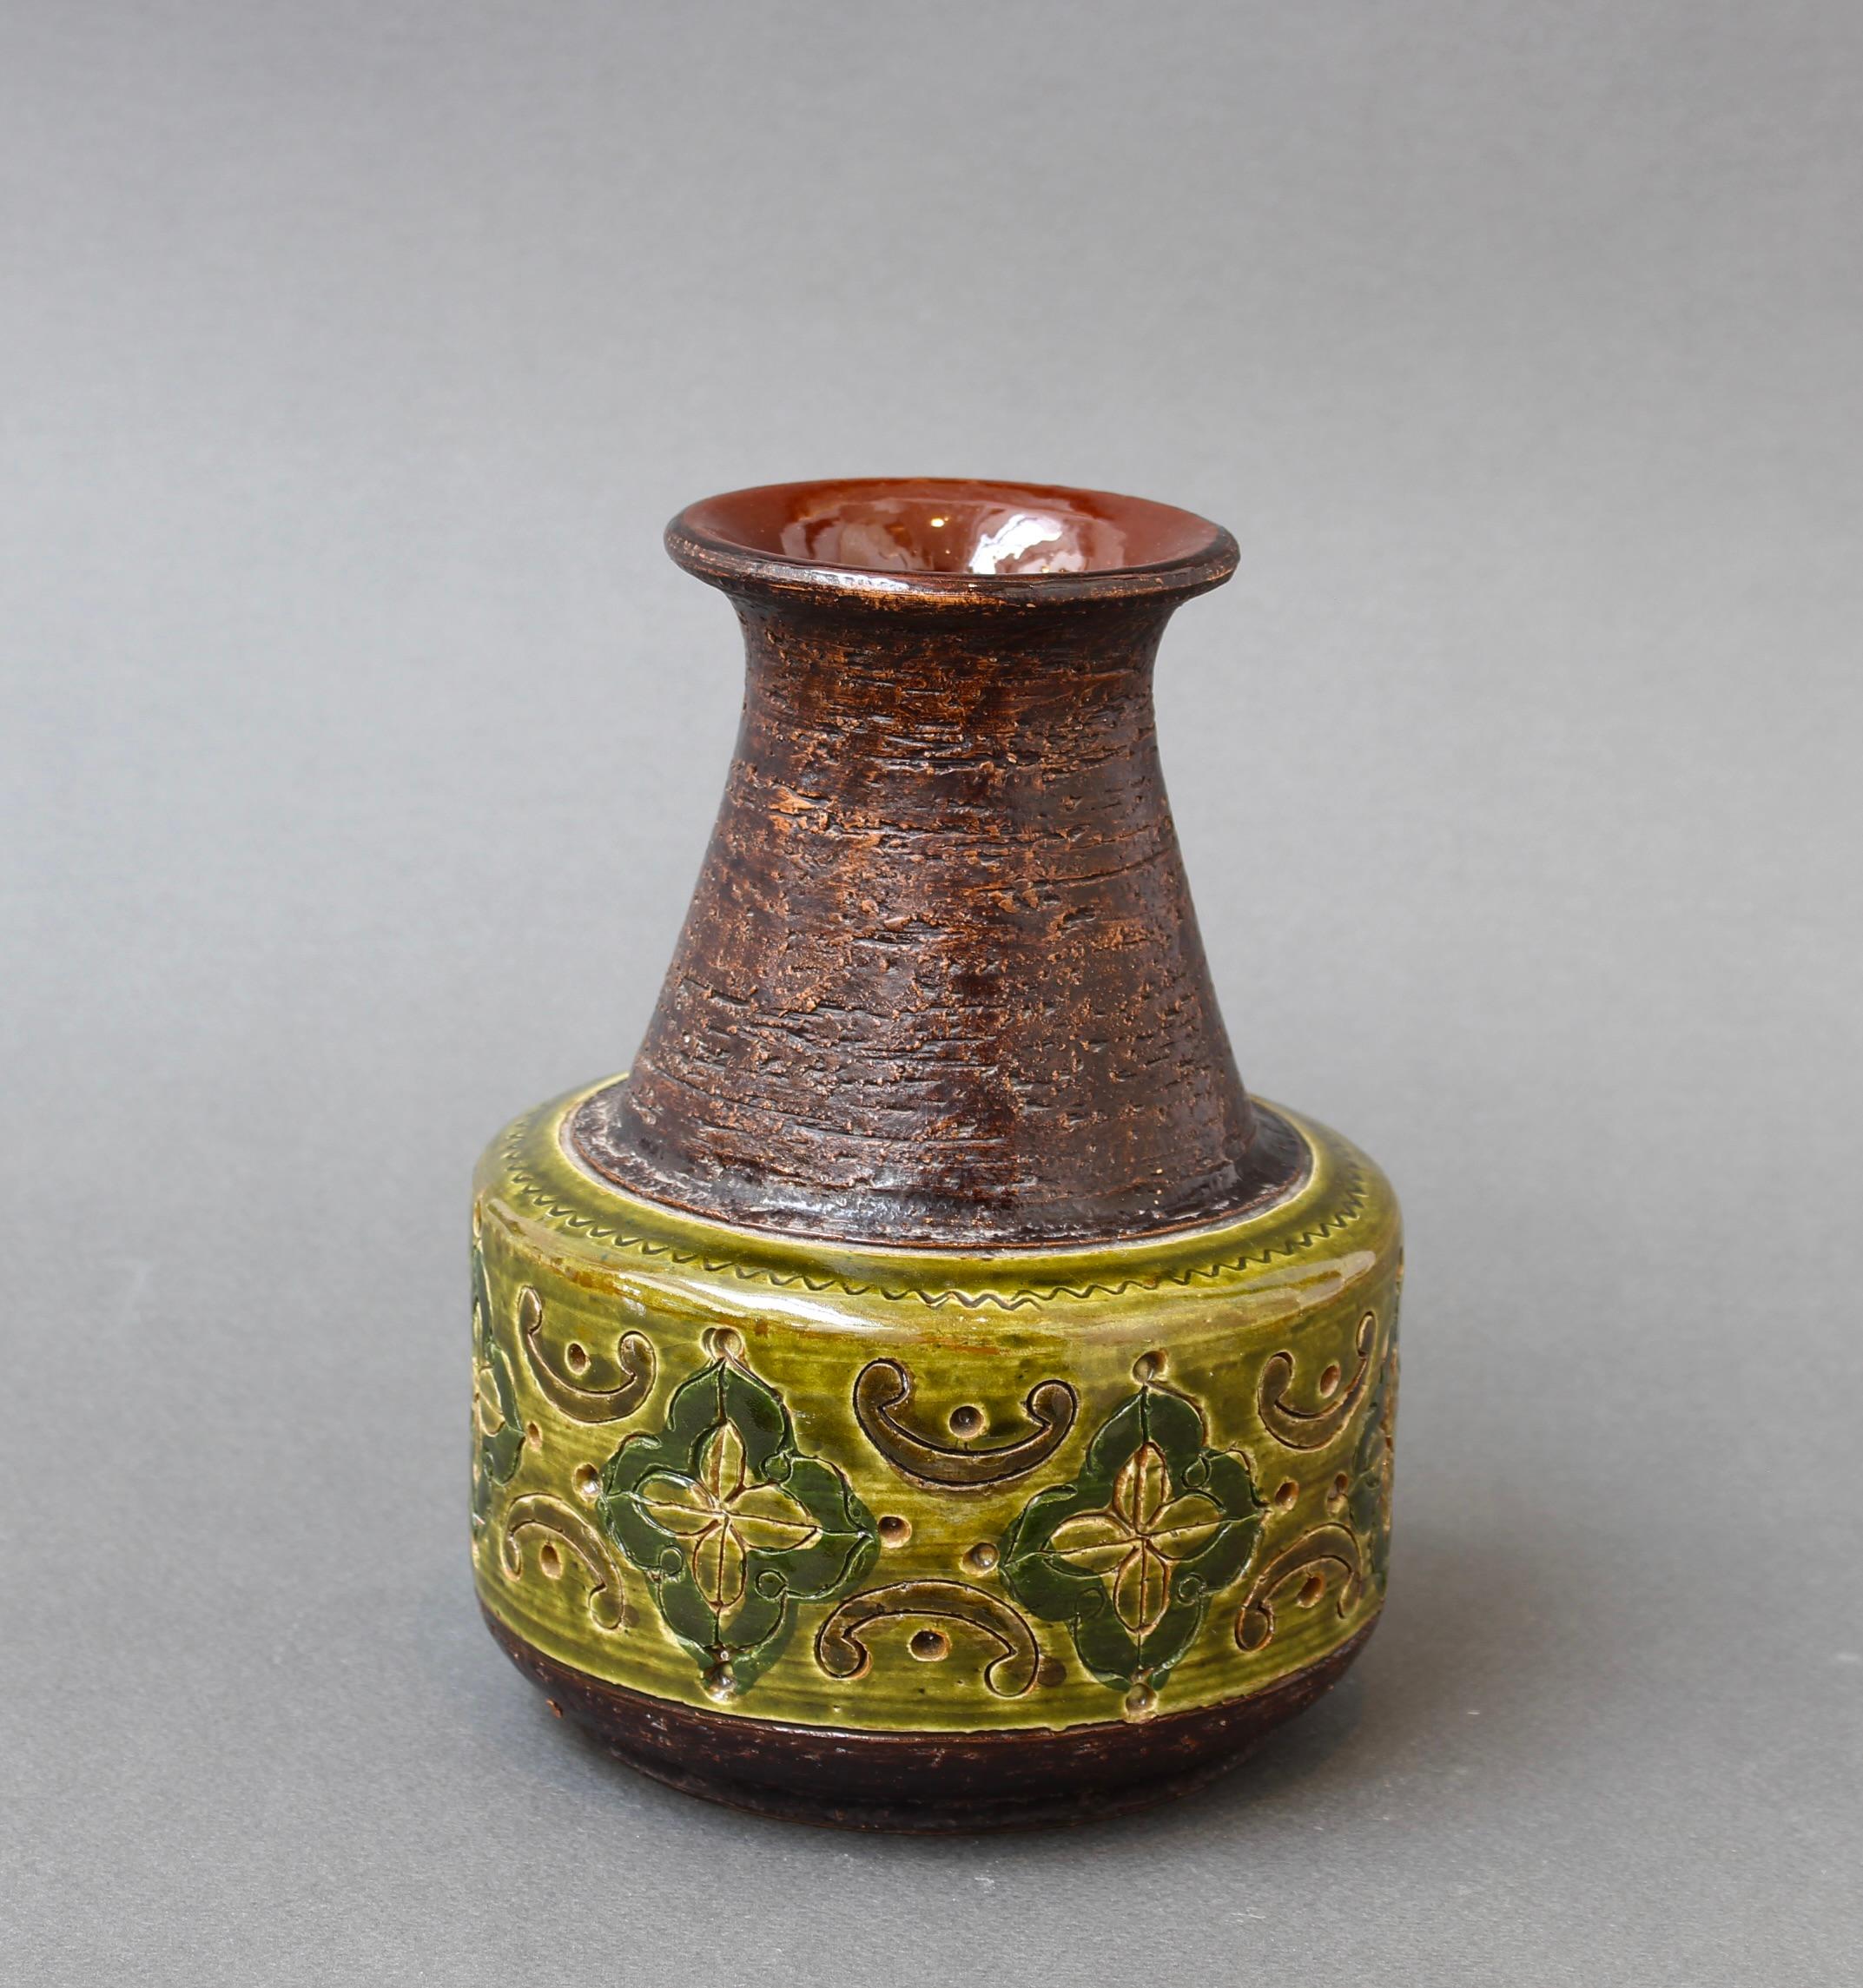 Mid-Century Italian ceramic vase by Aldo Londi for Bitossi (circa 1960s). Part of the 'Arabesque' range designed by Aldo Londi which was produced in the 1960s, it presents a glazed central band and rough-textured manganese-brown glazed neck and